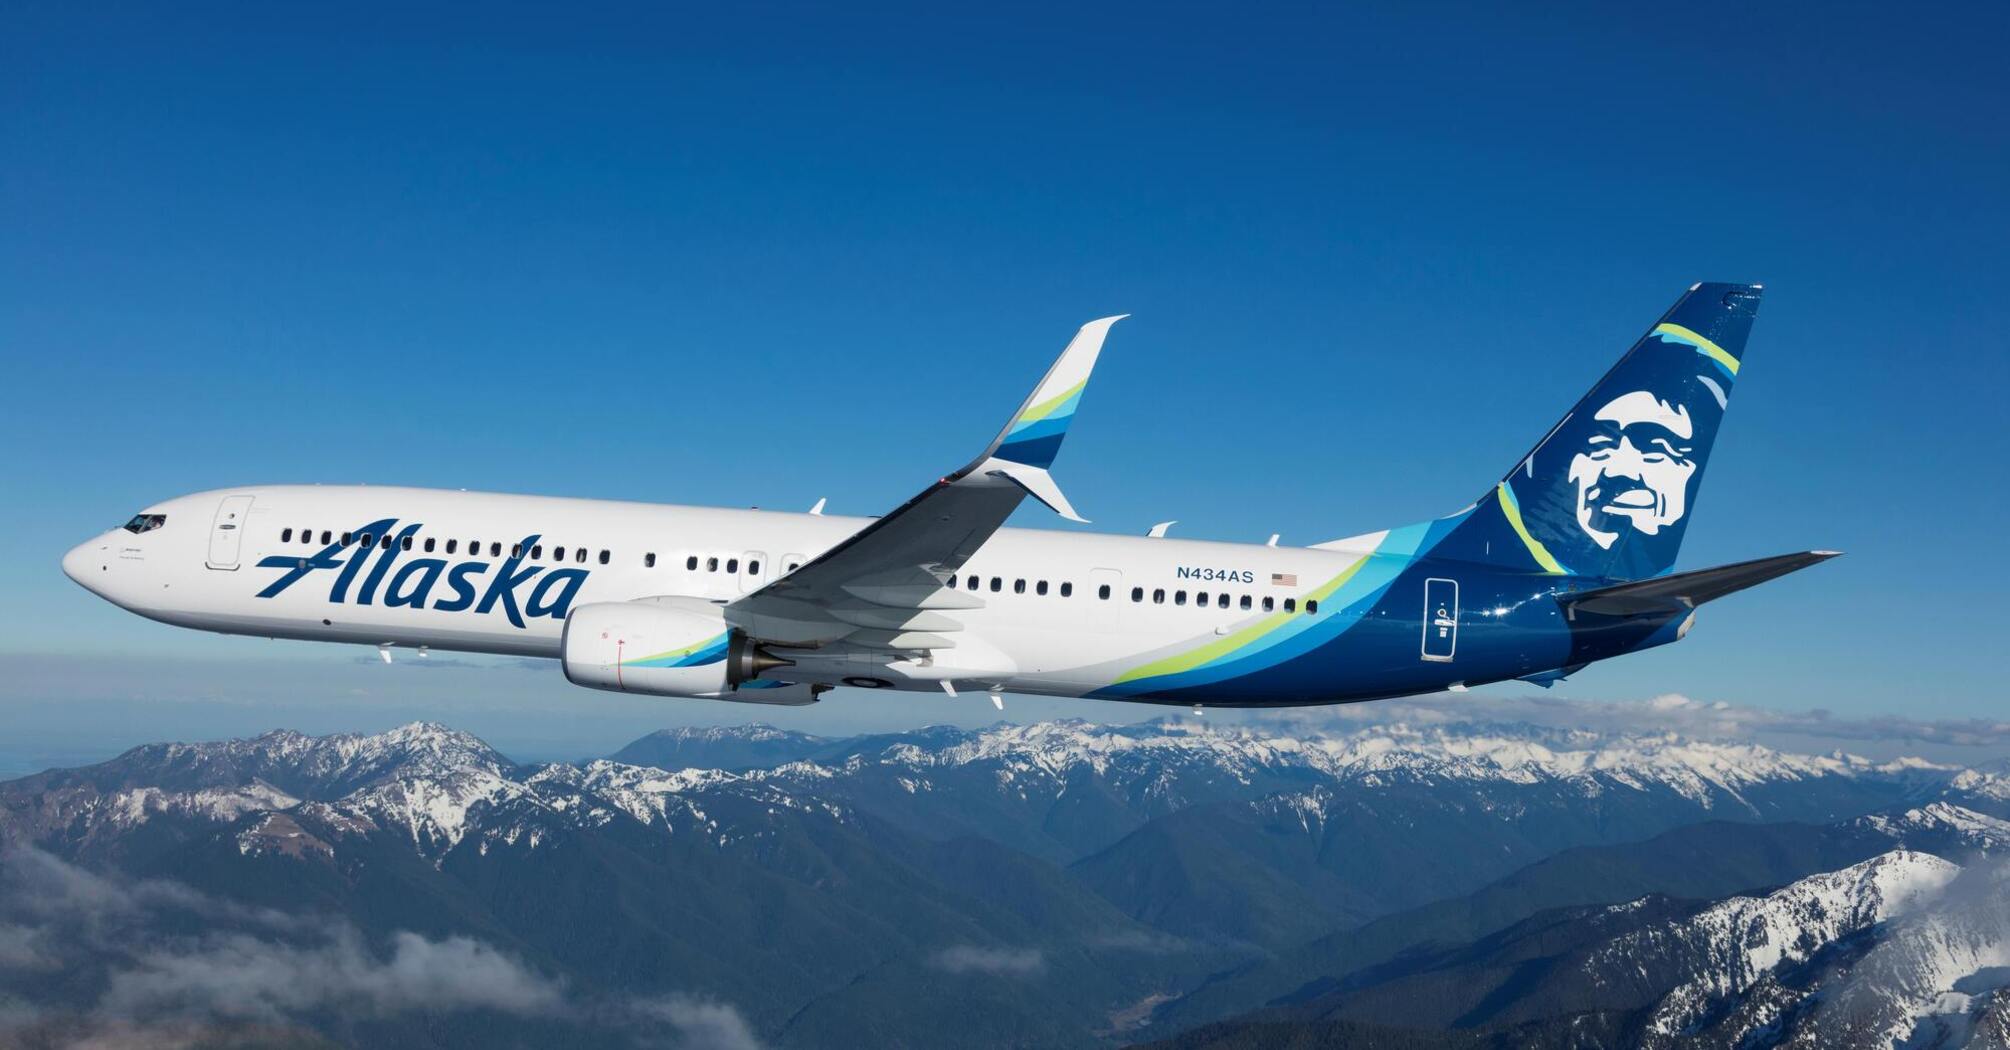 How to travel easily and hassle-free with Alaska Airlines flights